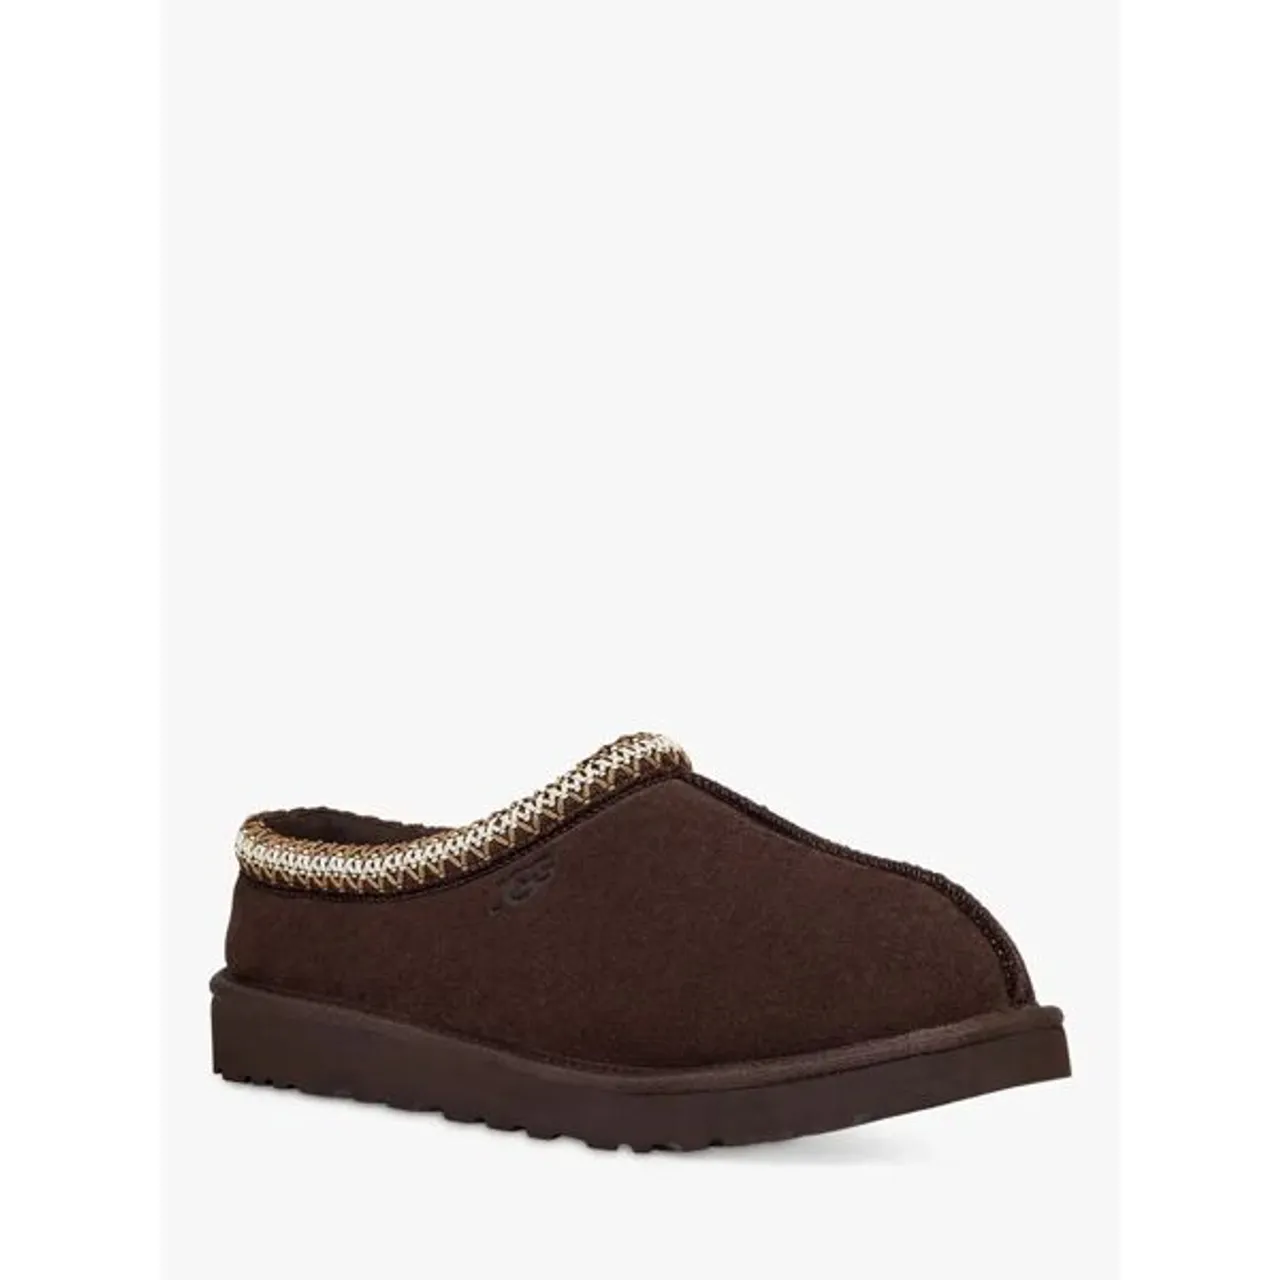 UGG Tasman Suede Slippers - Dusted Cocoa - Male